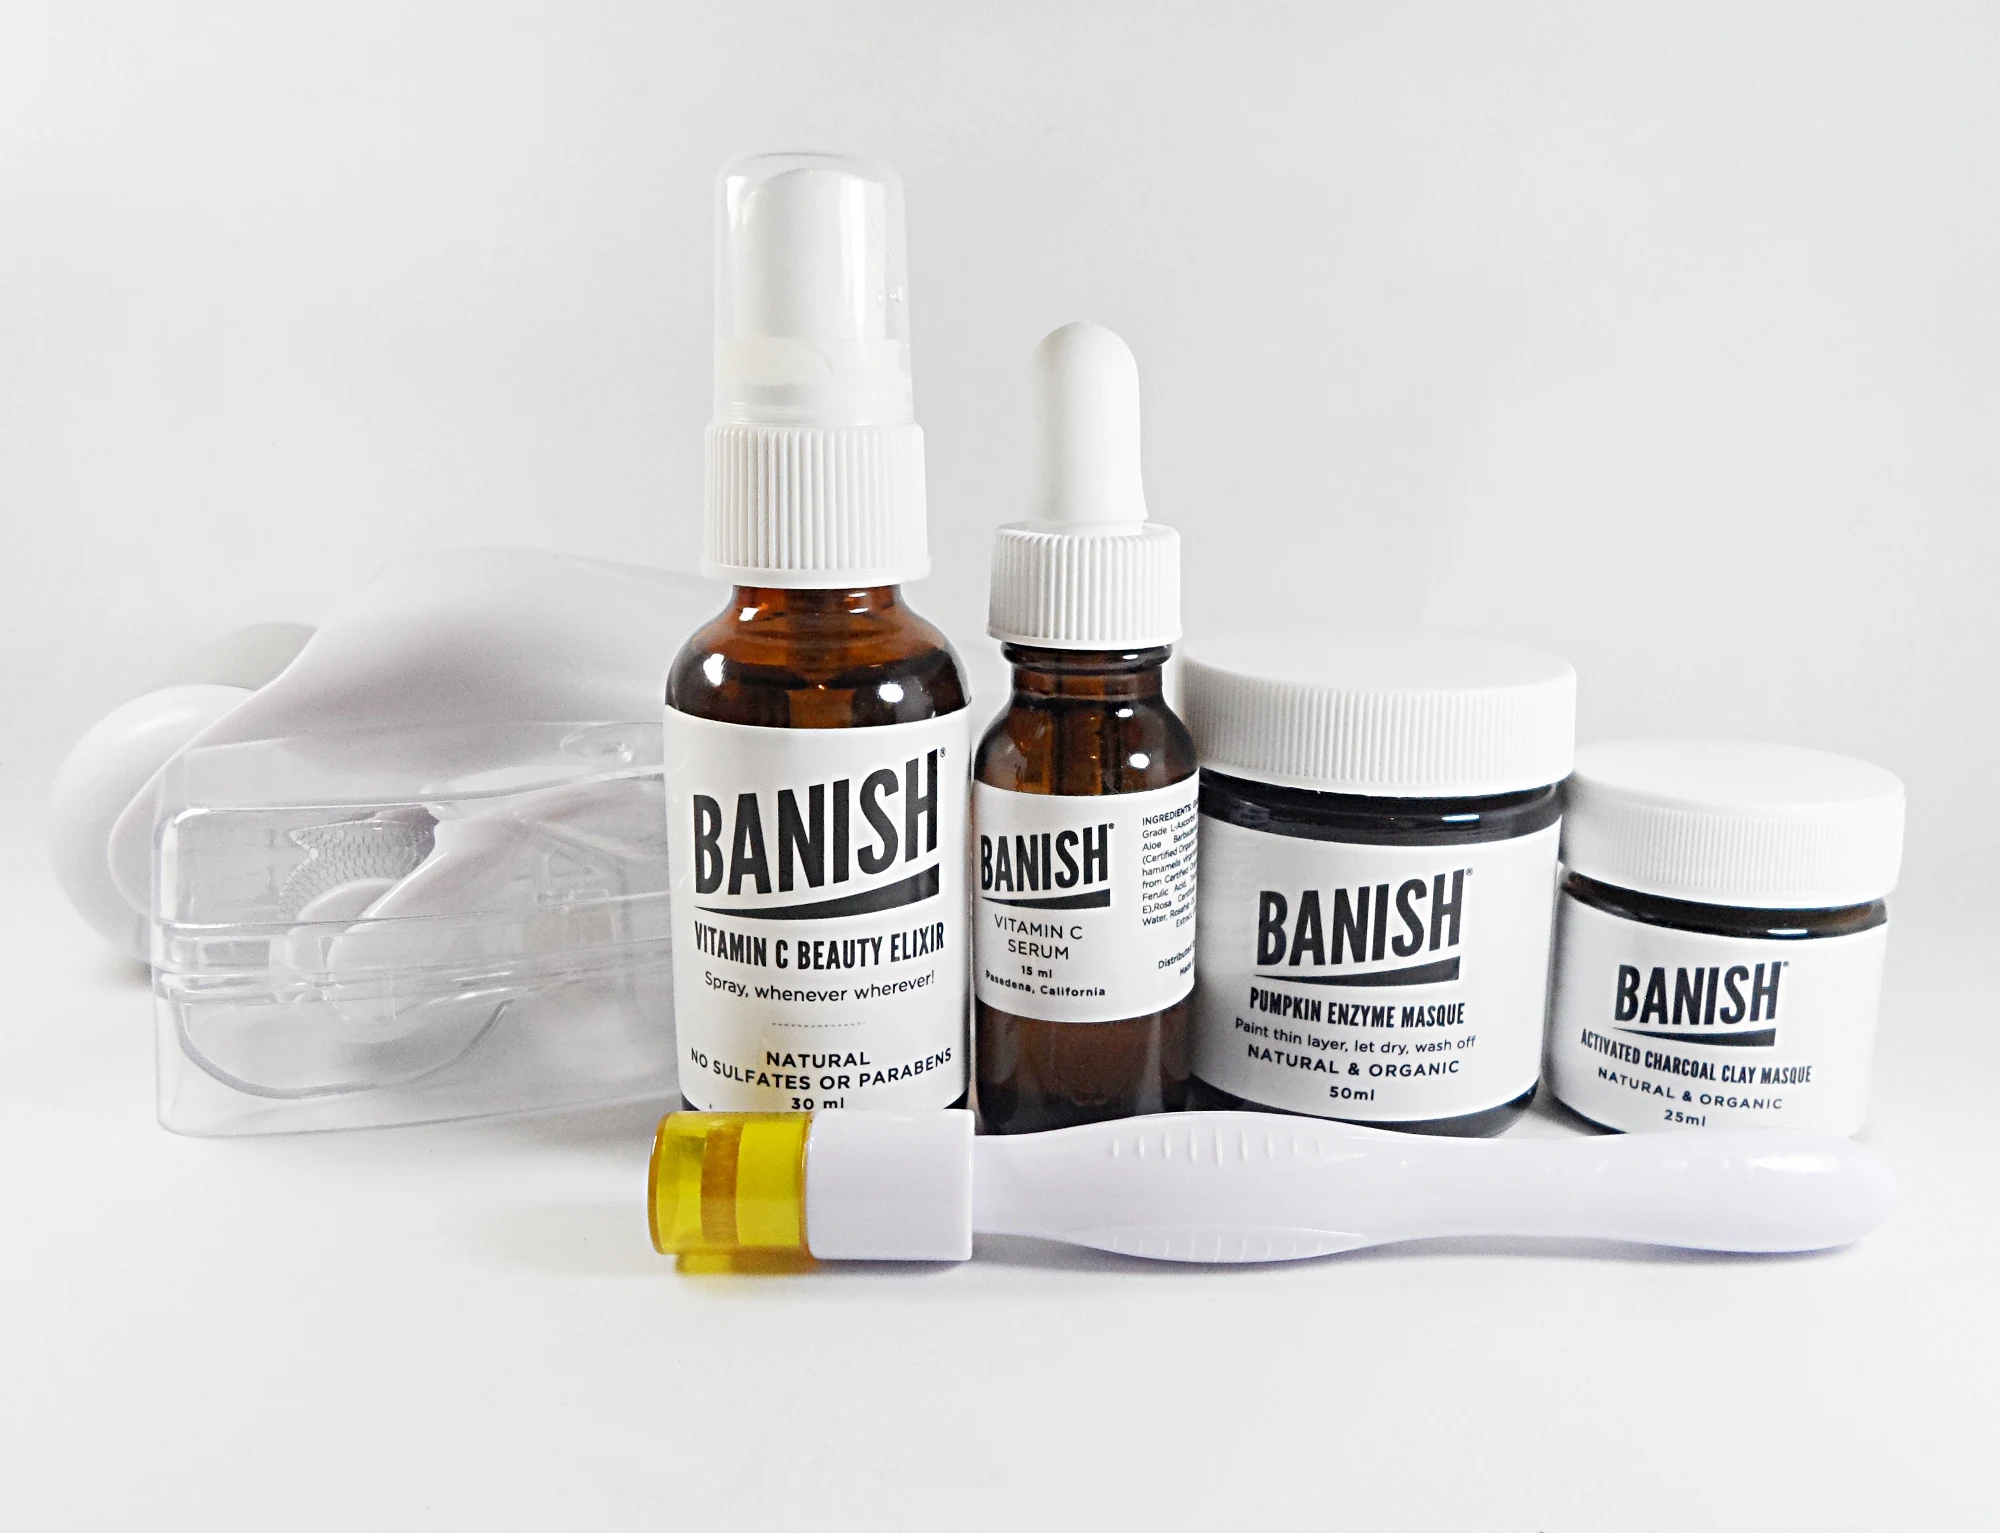 various skincare products by brand Banish on a white studio background